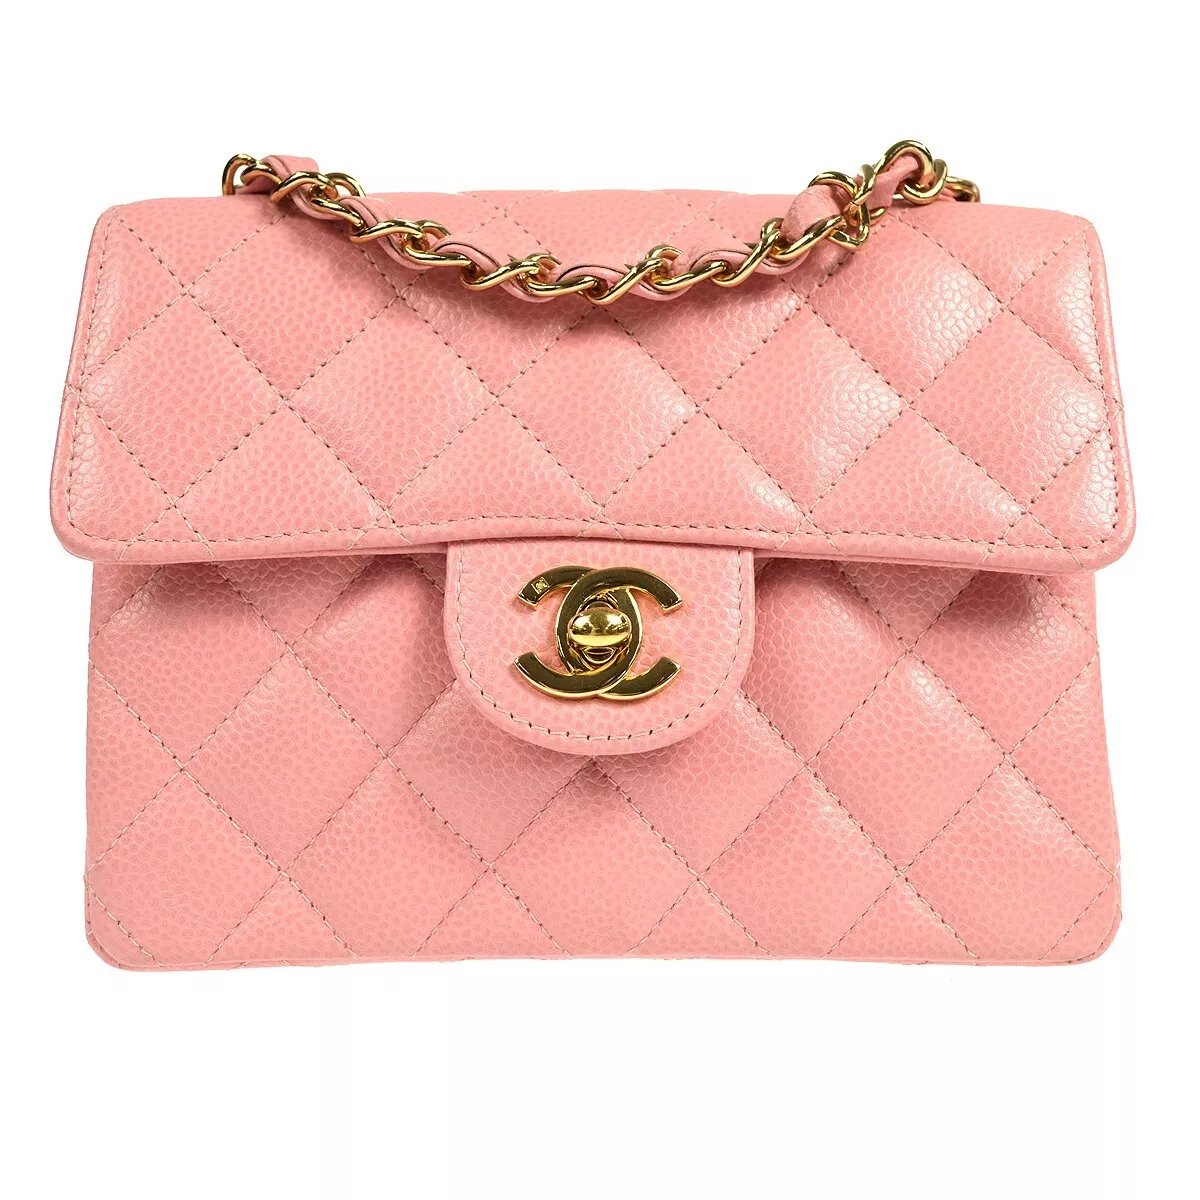 CHANEL Lambskin Quilted Bi-Color Top Handle Clutch With Chain Black Pink  1240431